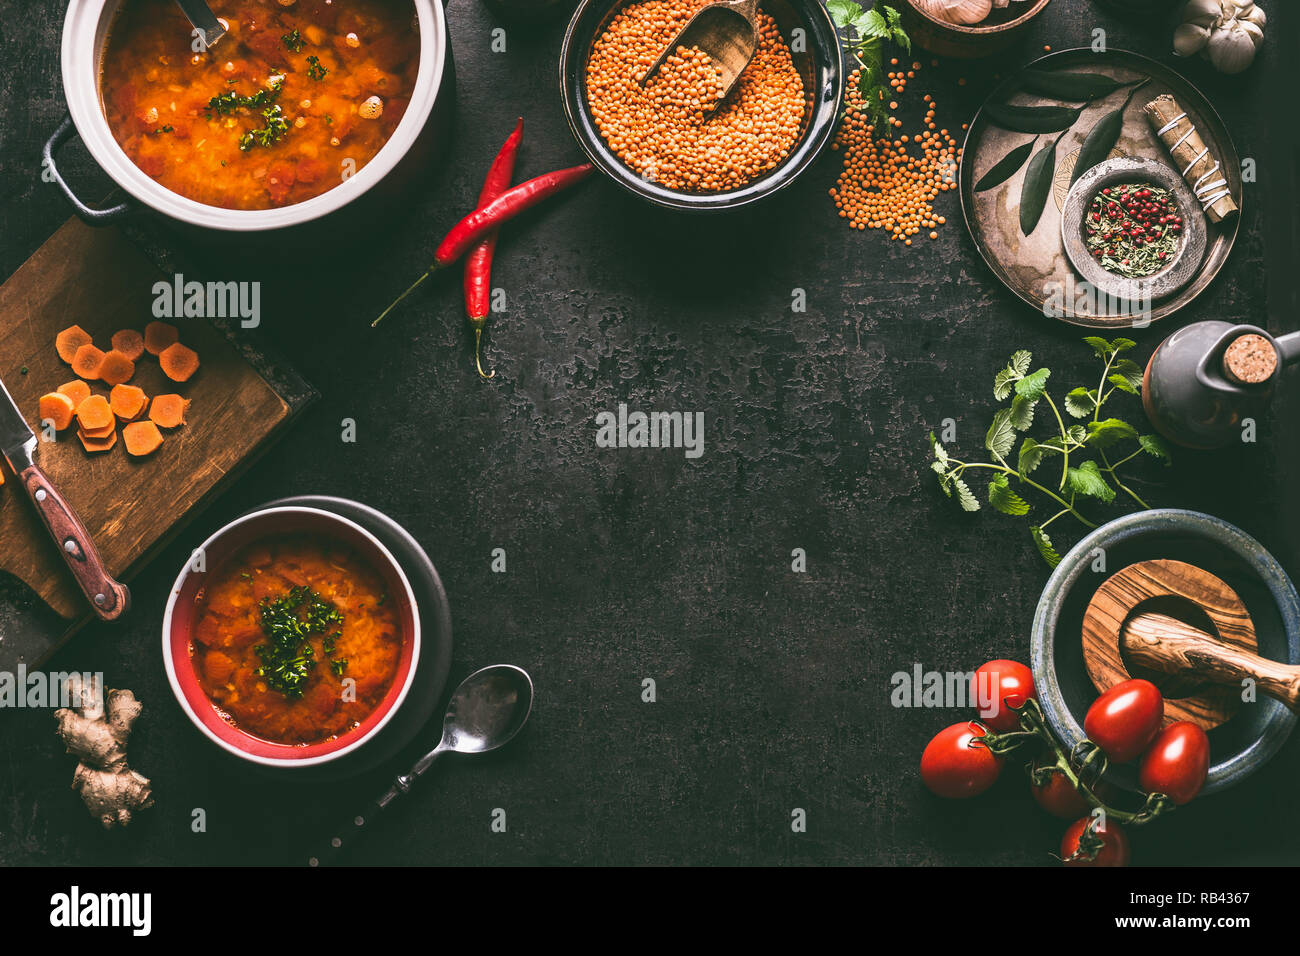 Lentil dishes food background. Lentil soup with cooking ingredients on dark rustic kitchen table background, top view. Healthy vegan food concept. Bla Stock Photo